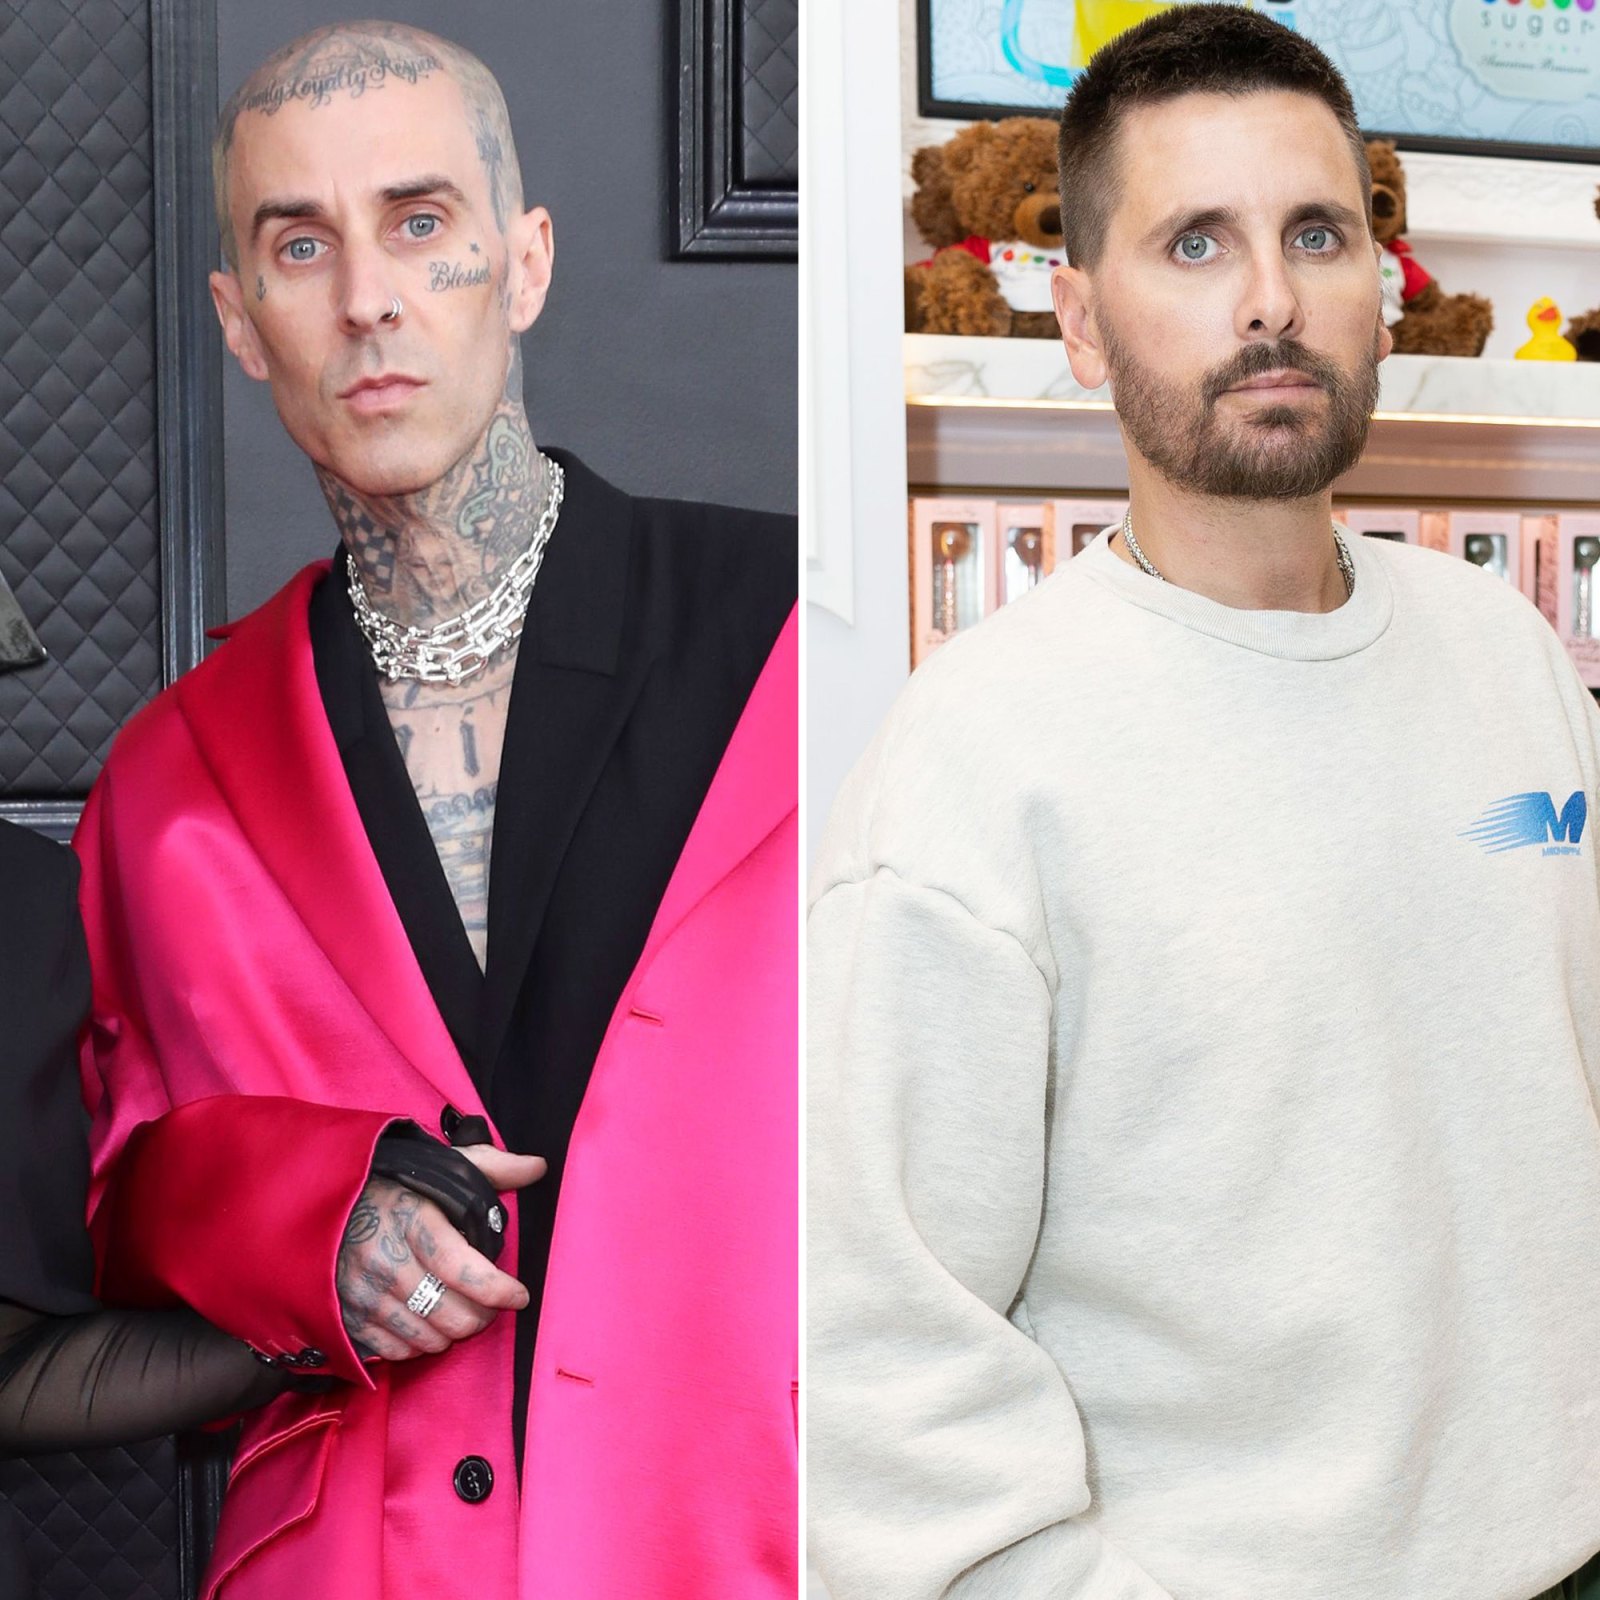 Keeping Cordial Everything Travis Scott Disick Have Said About Each Other